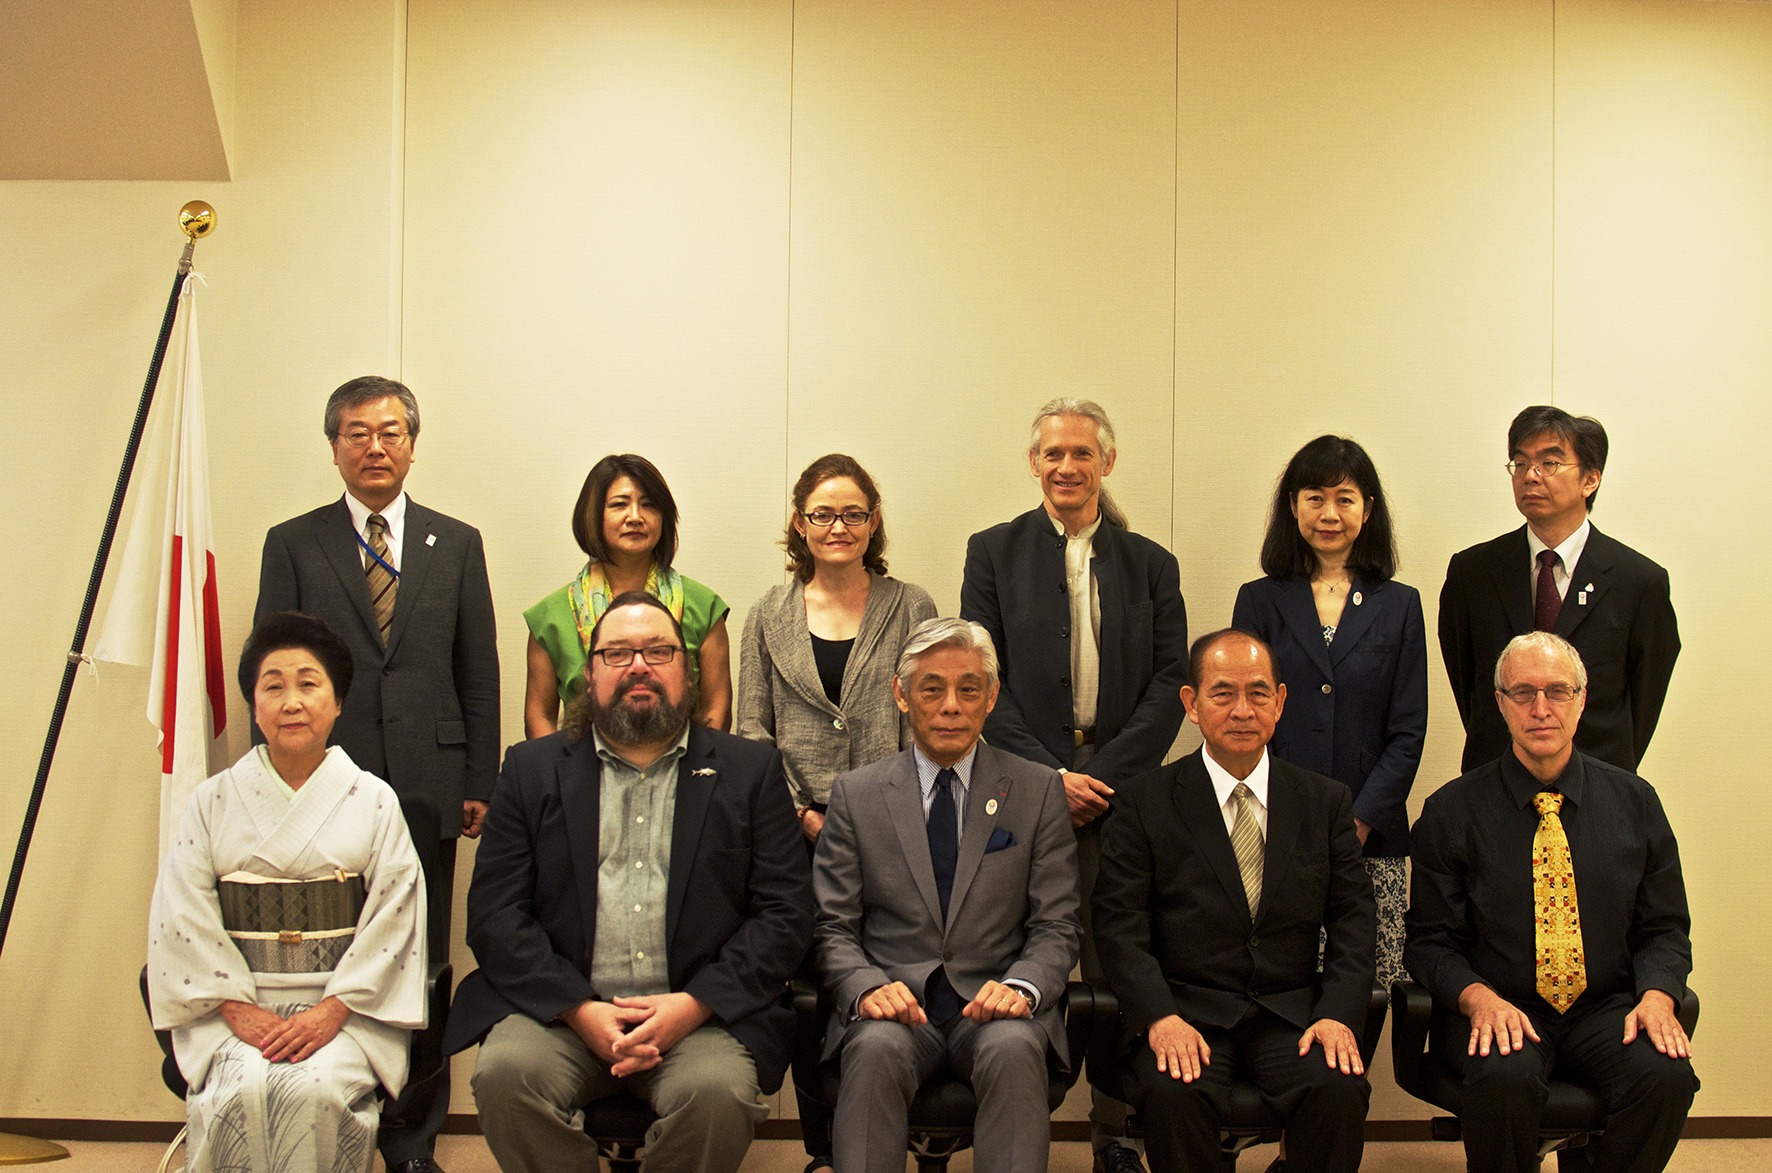 Cultured group: Kyoto Journal founder John Einarsen (far right, front) and photojournalist Everett Kennedy Brown (third from right, back) were among those given awards for promoting Japanese culture abroad by Cultural Affairs Agency Commissioner Seiichi Kondo (center, front). | NATASHA VIK